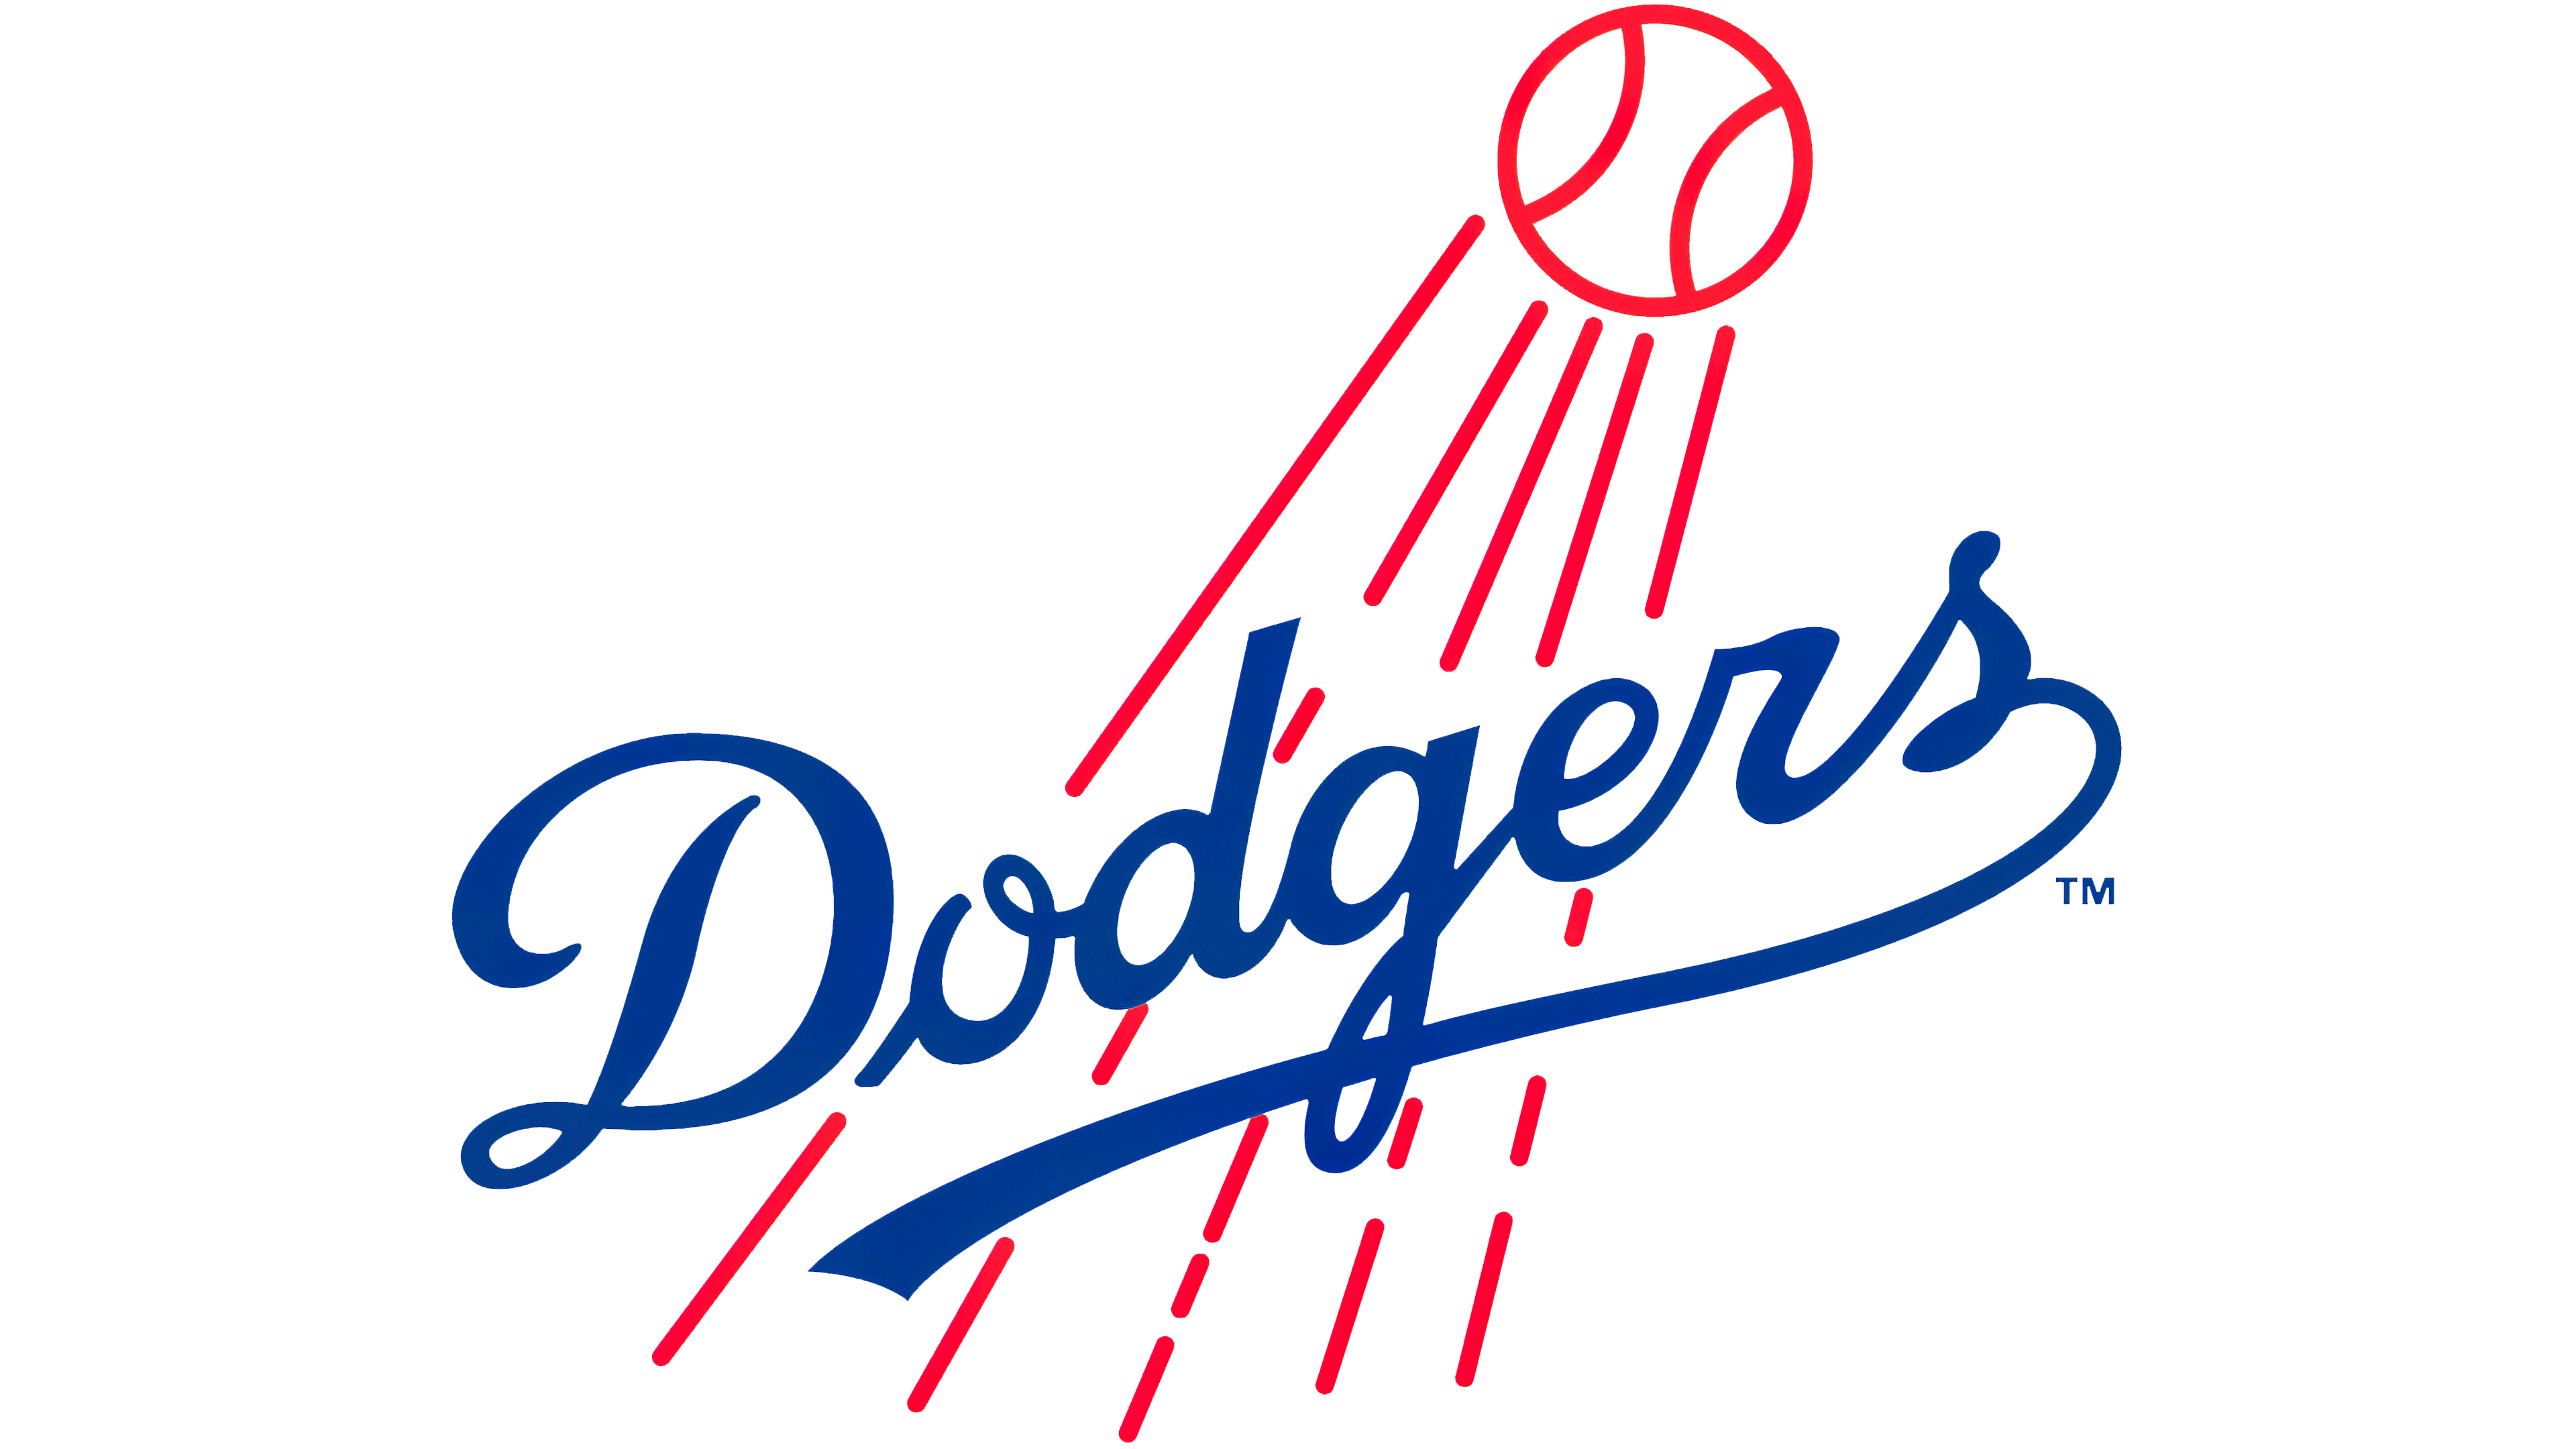 Los Angeles Dodgers 2021 Opening Day roster